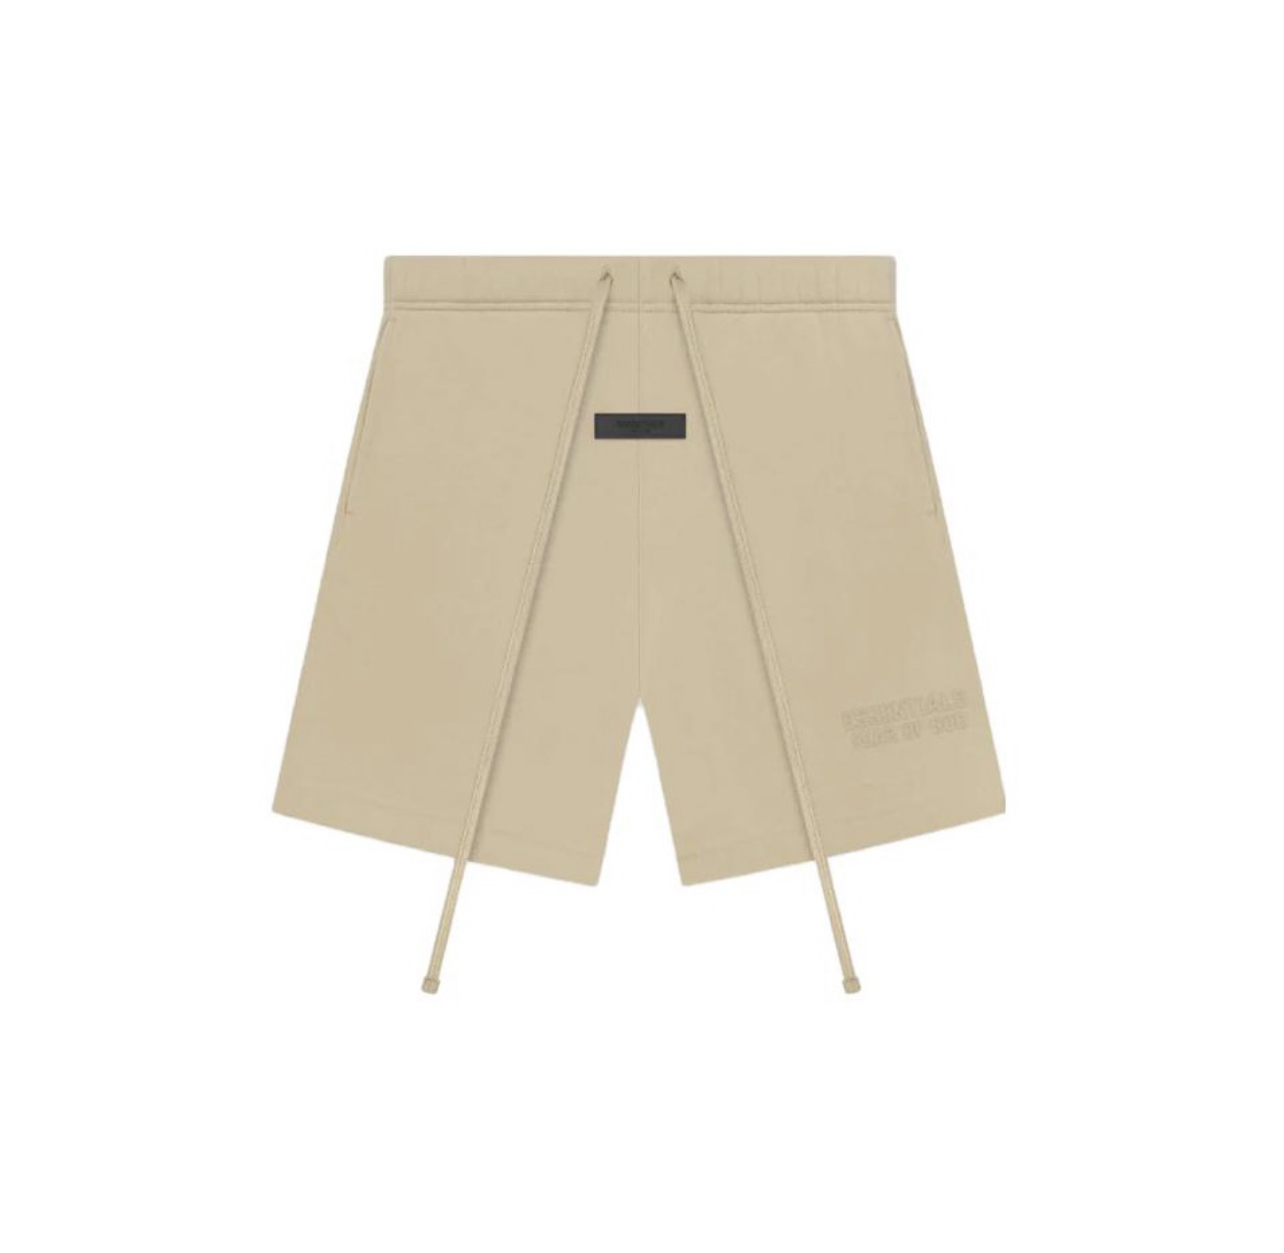 Essential Fear of God SS23 Sand Short